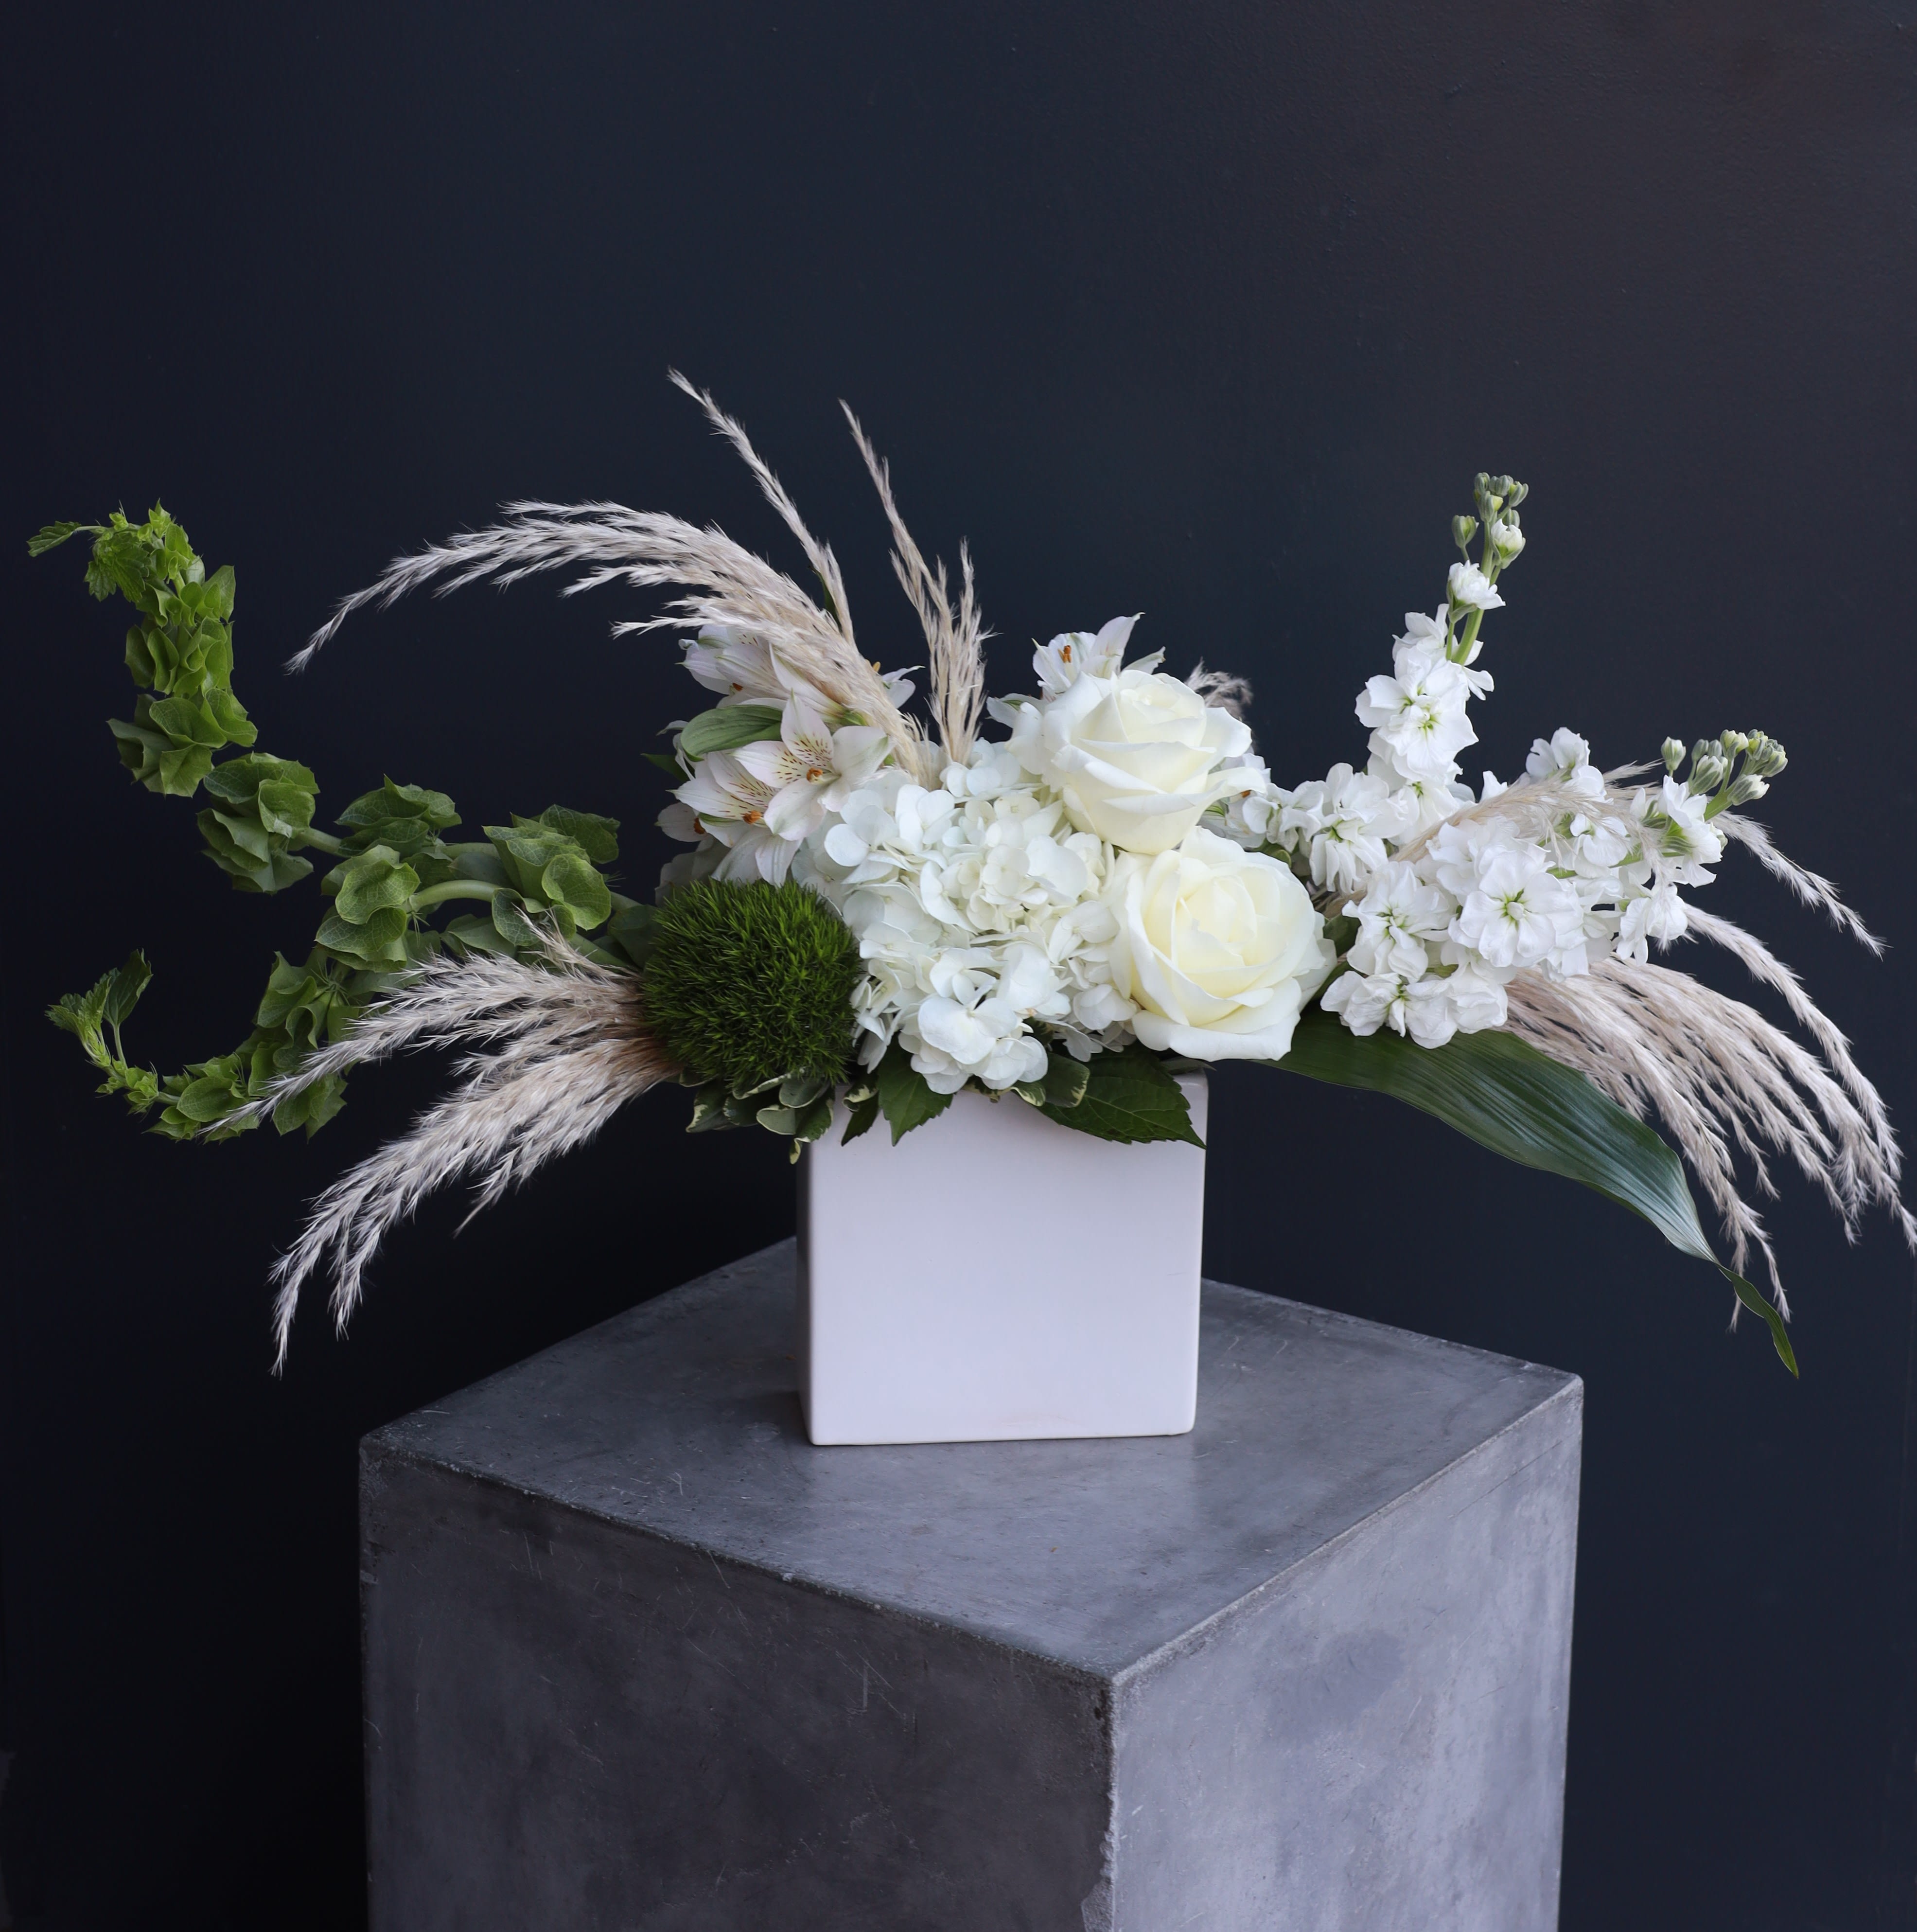 Snow White - An airy asymmetrical floral design with a gorgeous flow of white fresh cut stems.